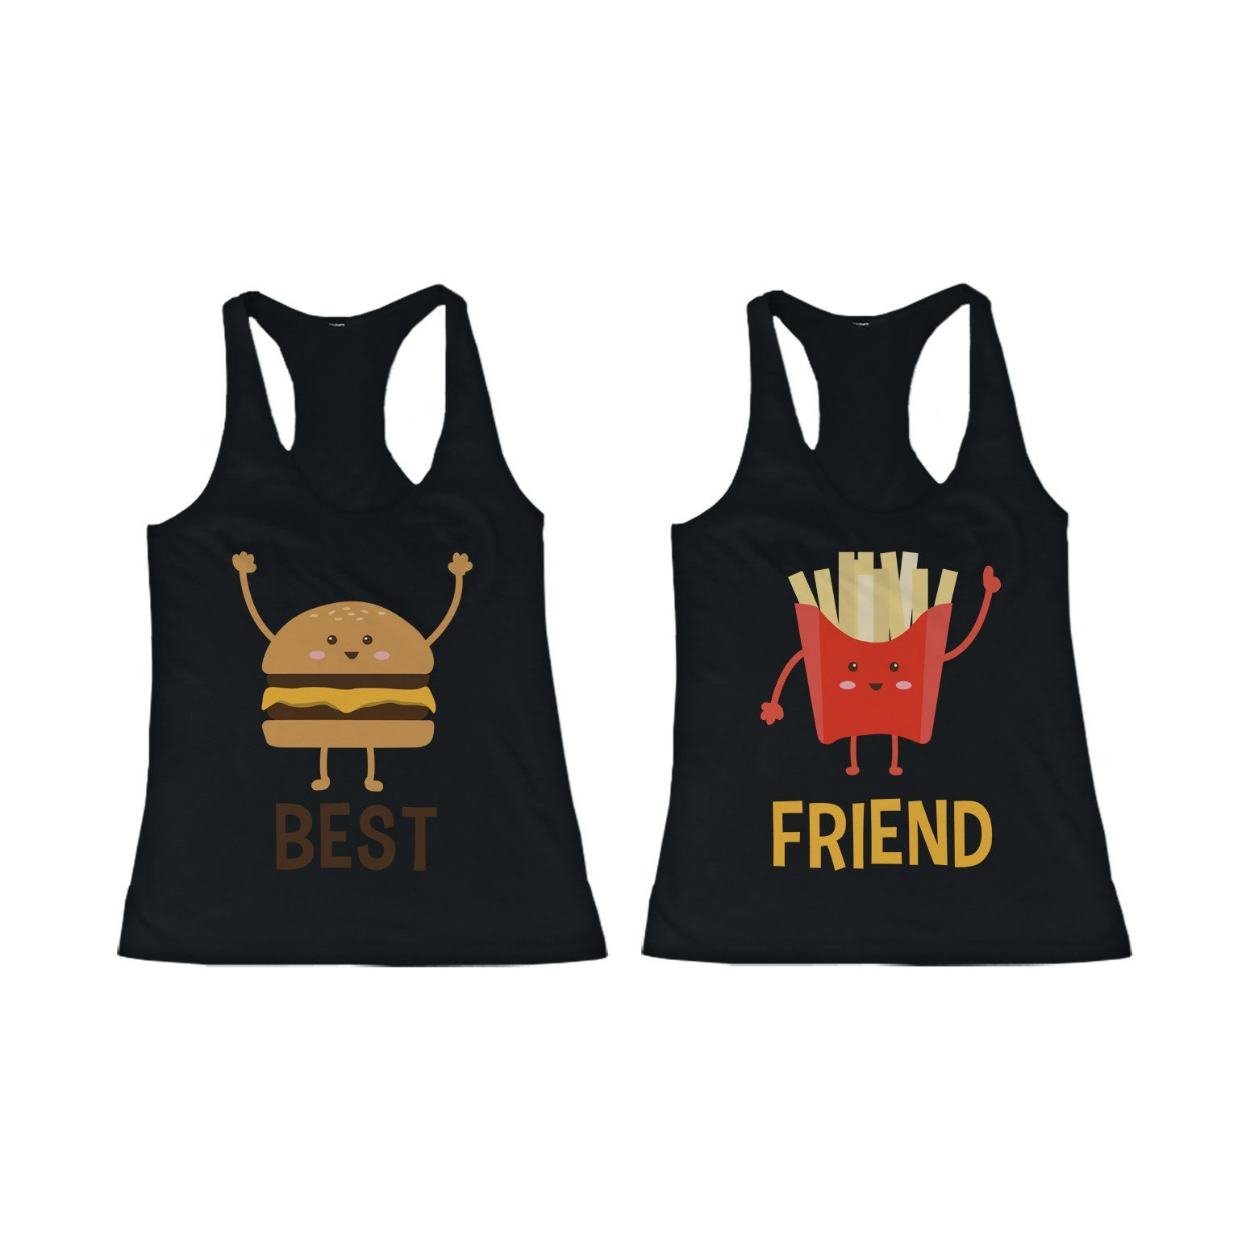 Burger And Fries Bff Tank Tops Best Friend Matching Tanks Sleeveless Shirts - 365 In Love